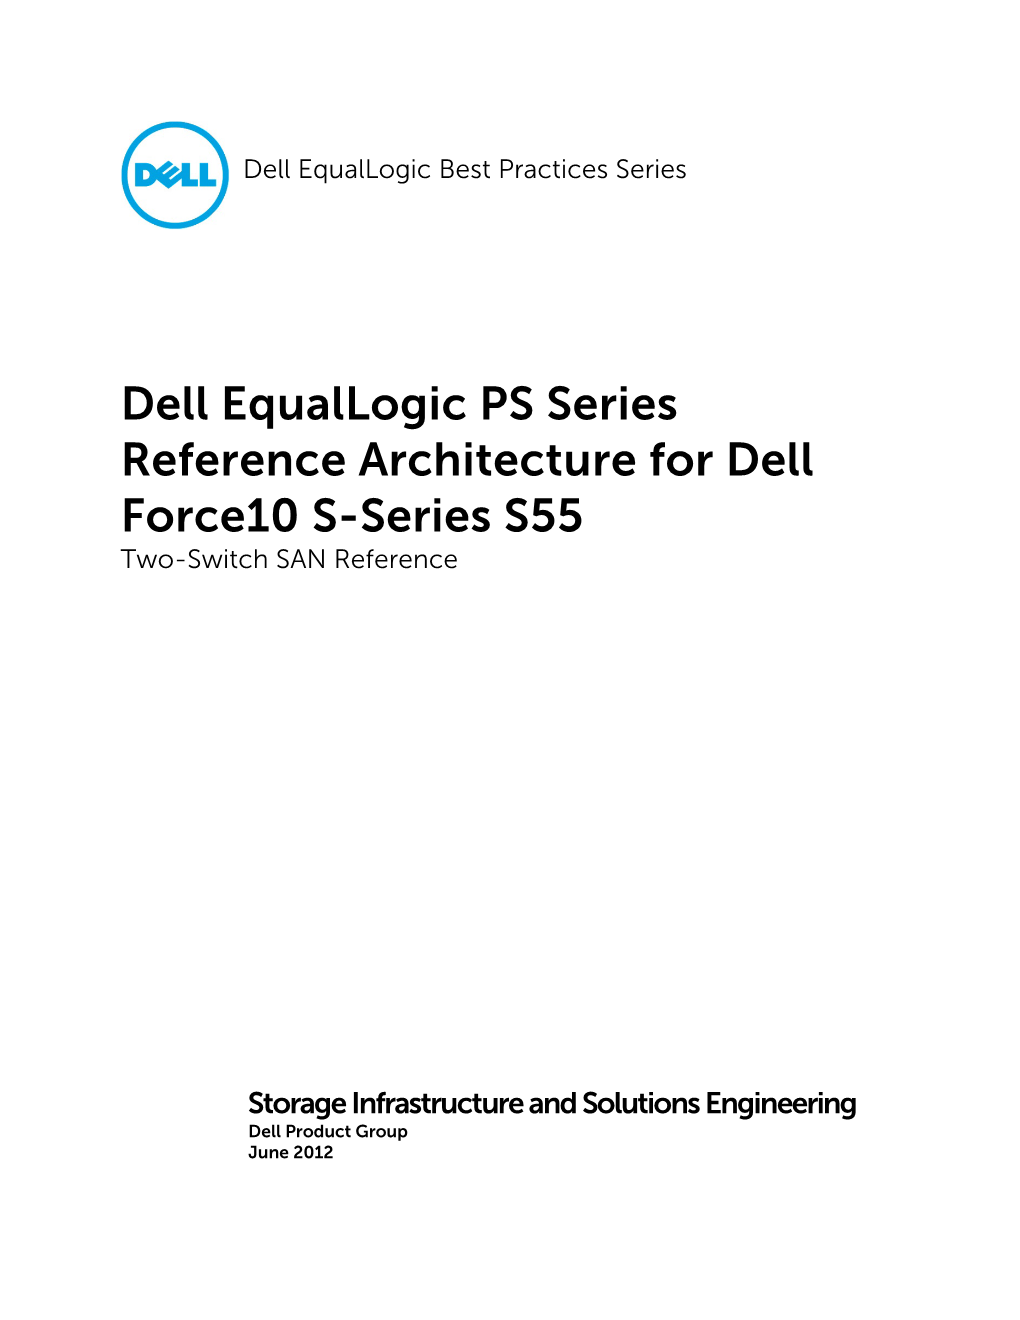 Dell Equallogic PS Series Reference Architecture for Dell Force10 S-Series S55 Two-Switch SAN Reference